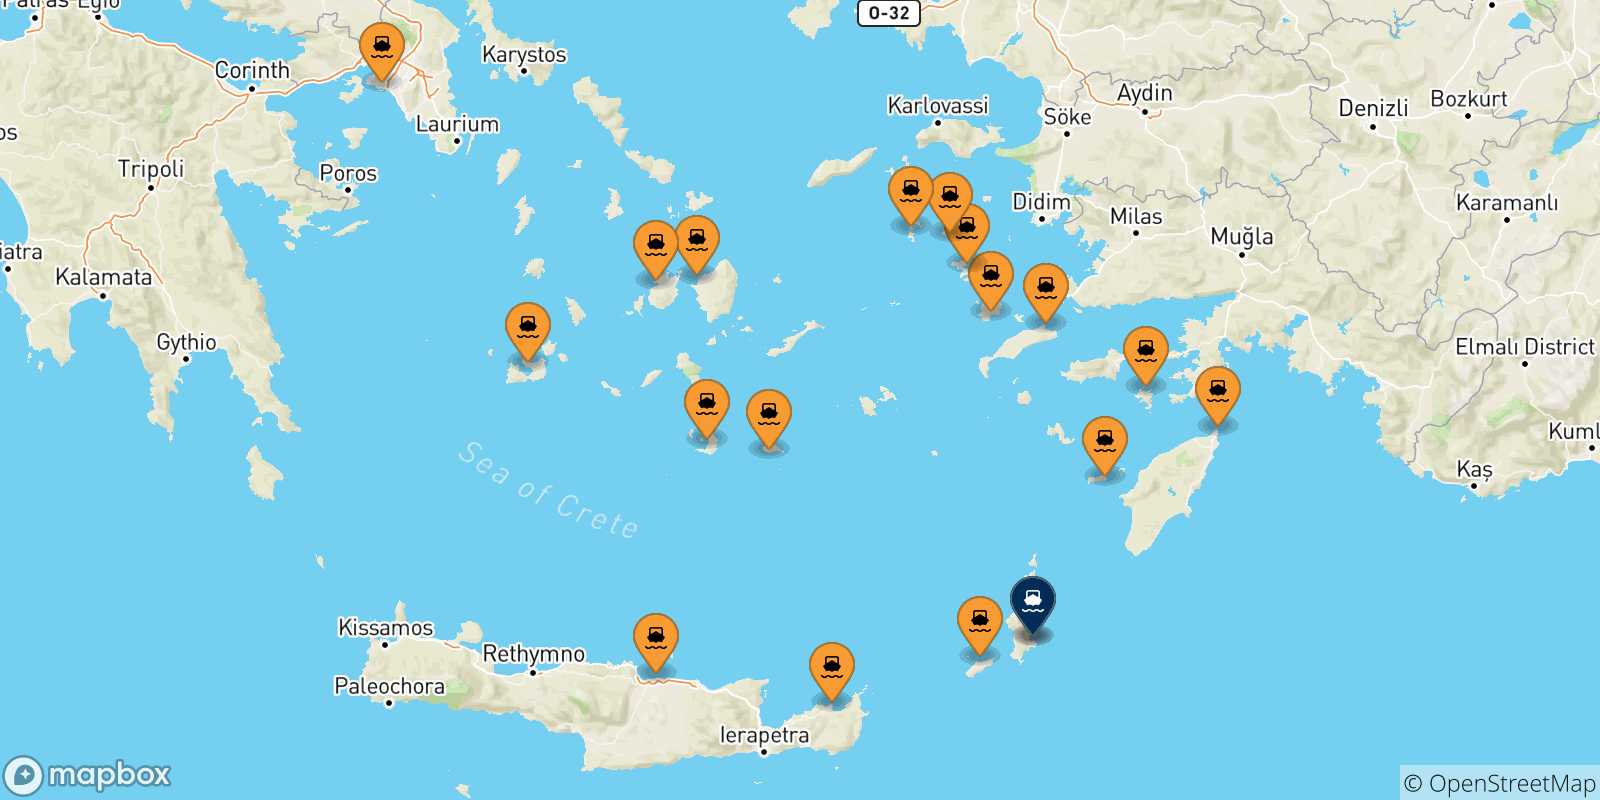 Map of the possible routes between Greece and Karpathos